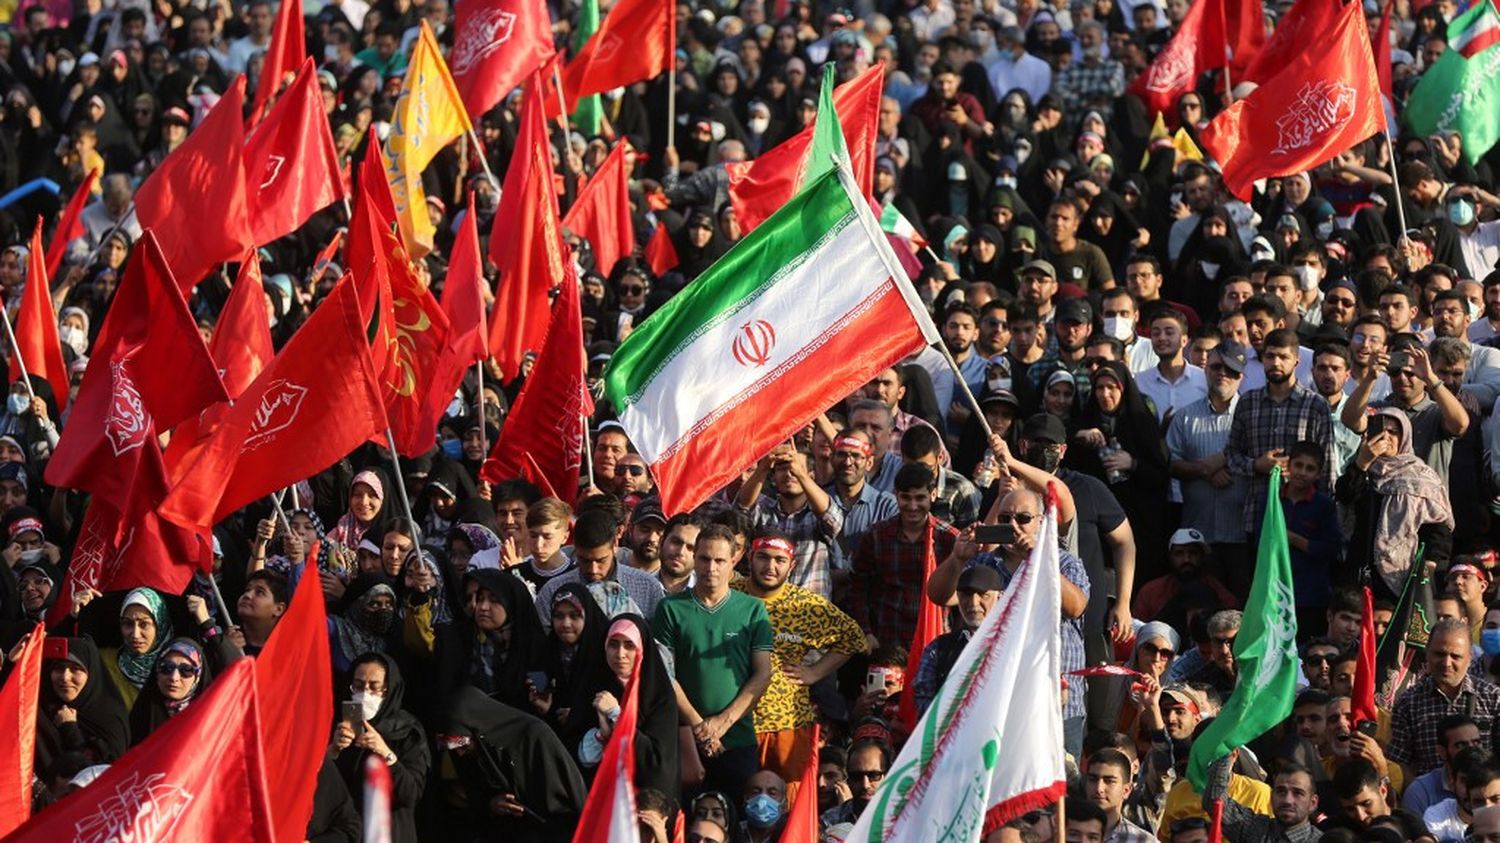 Protests in Iran: European Union sanctions morality police and 11 leaders implicated in crackdown
